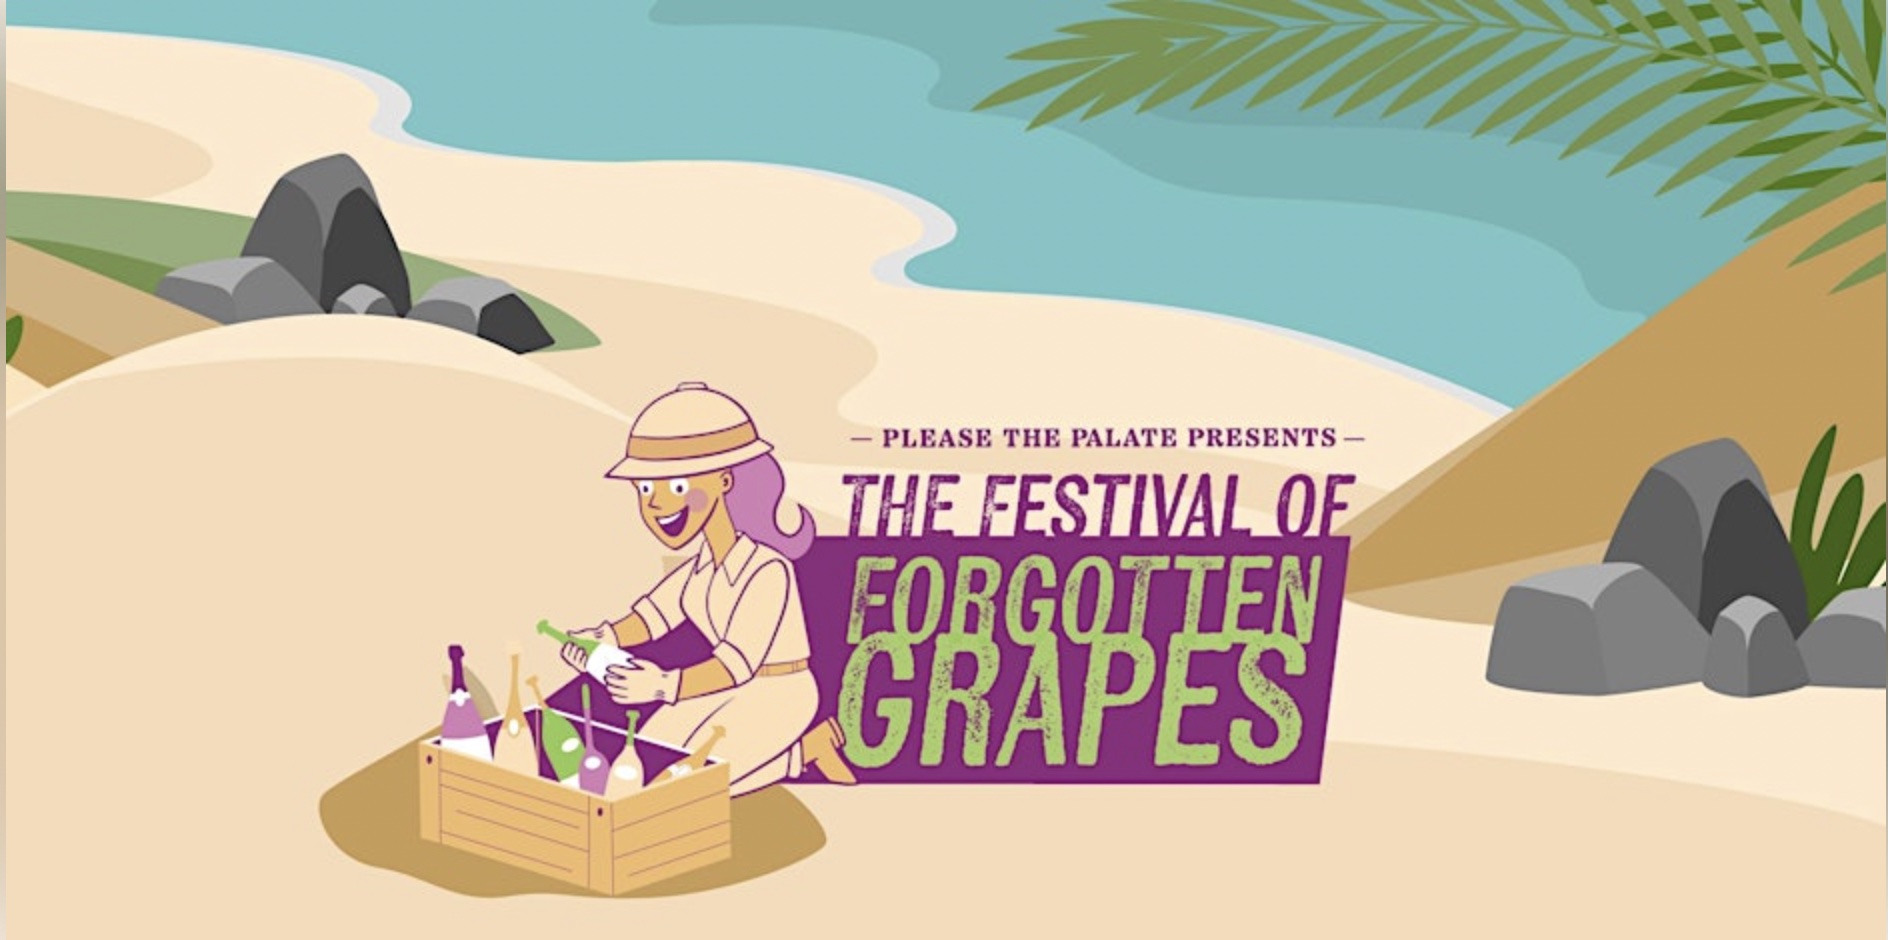 Please The Palate Presents The Festival of Forgotten Grapes